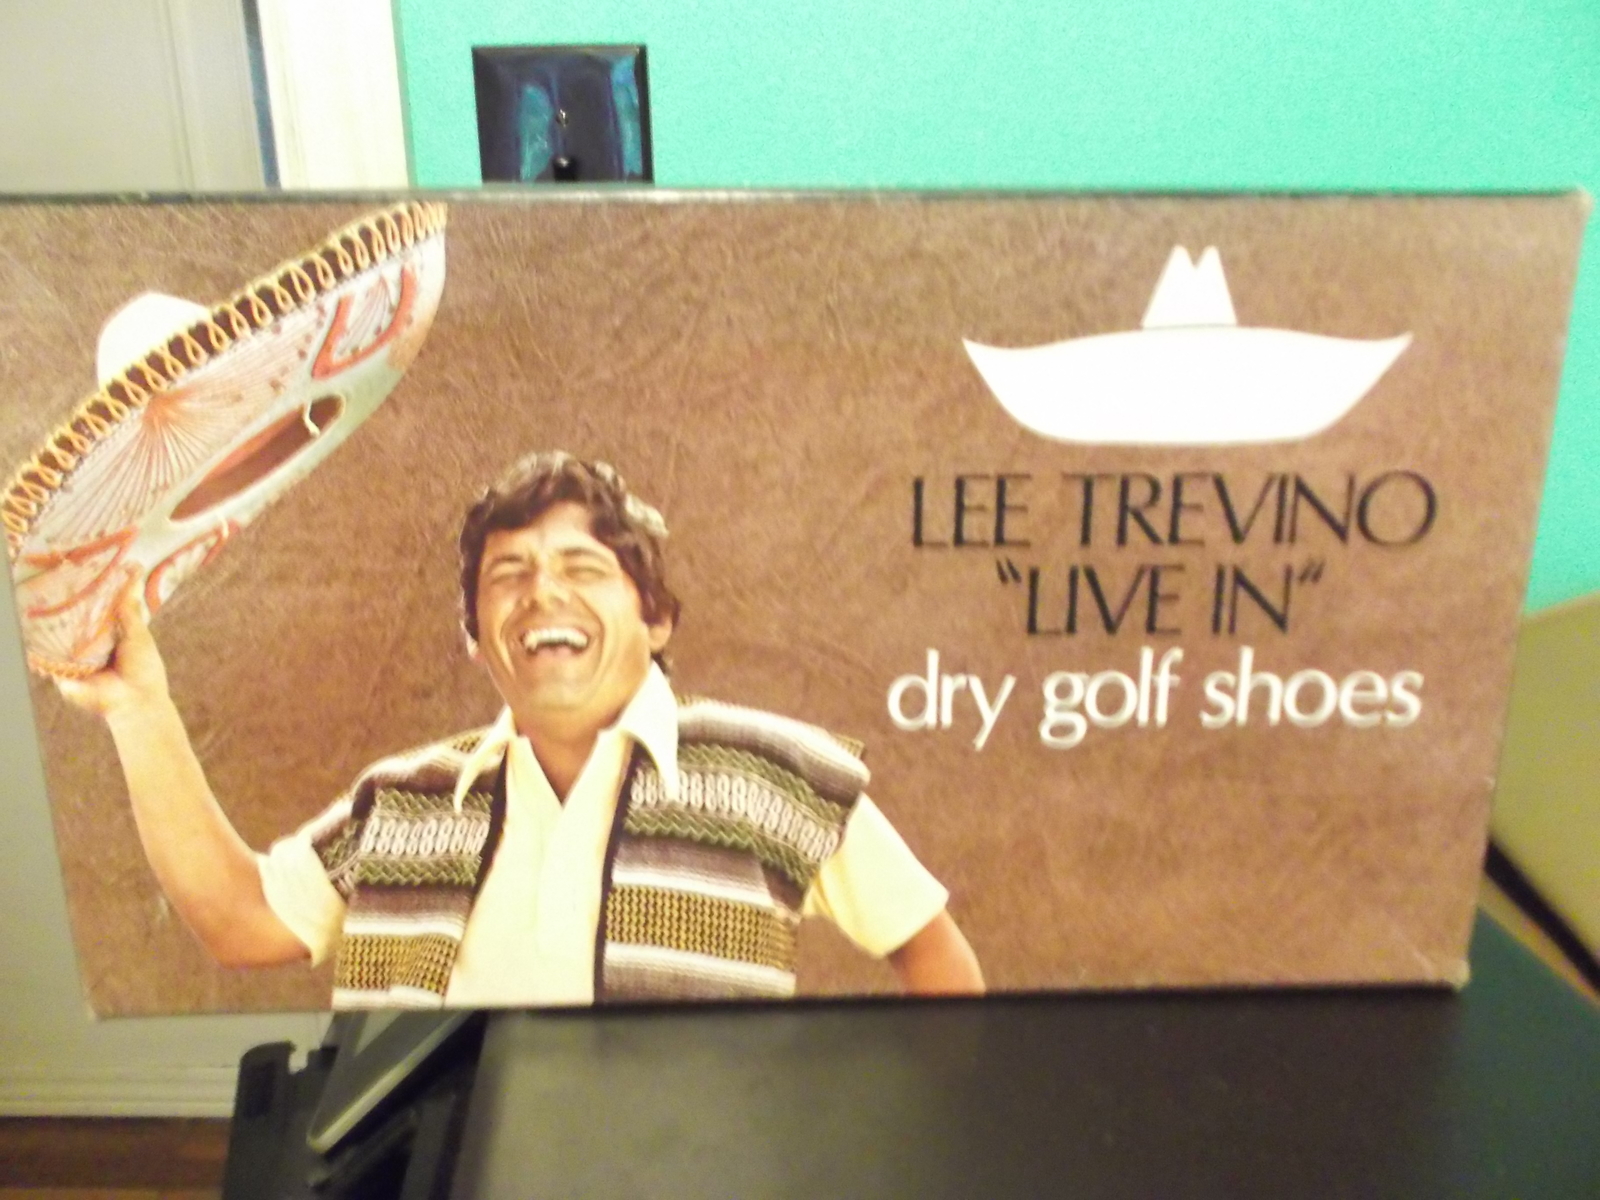 Lee Trevino "Live In" Dry Gold Shoes Shoe Box (no shoes) - $25.00